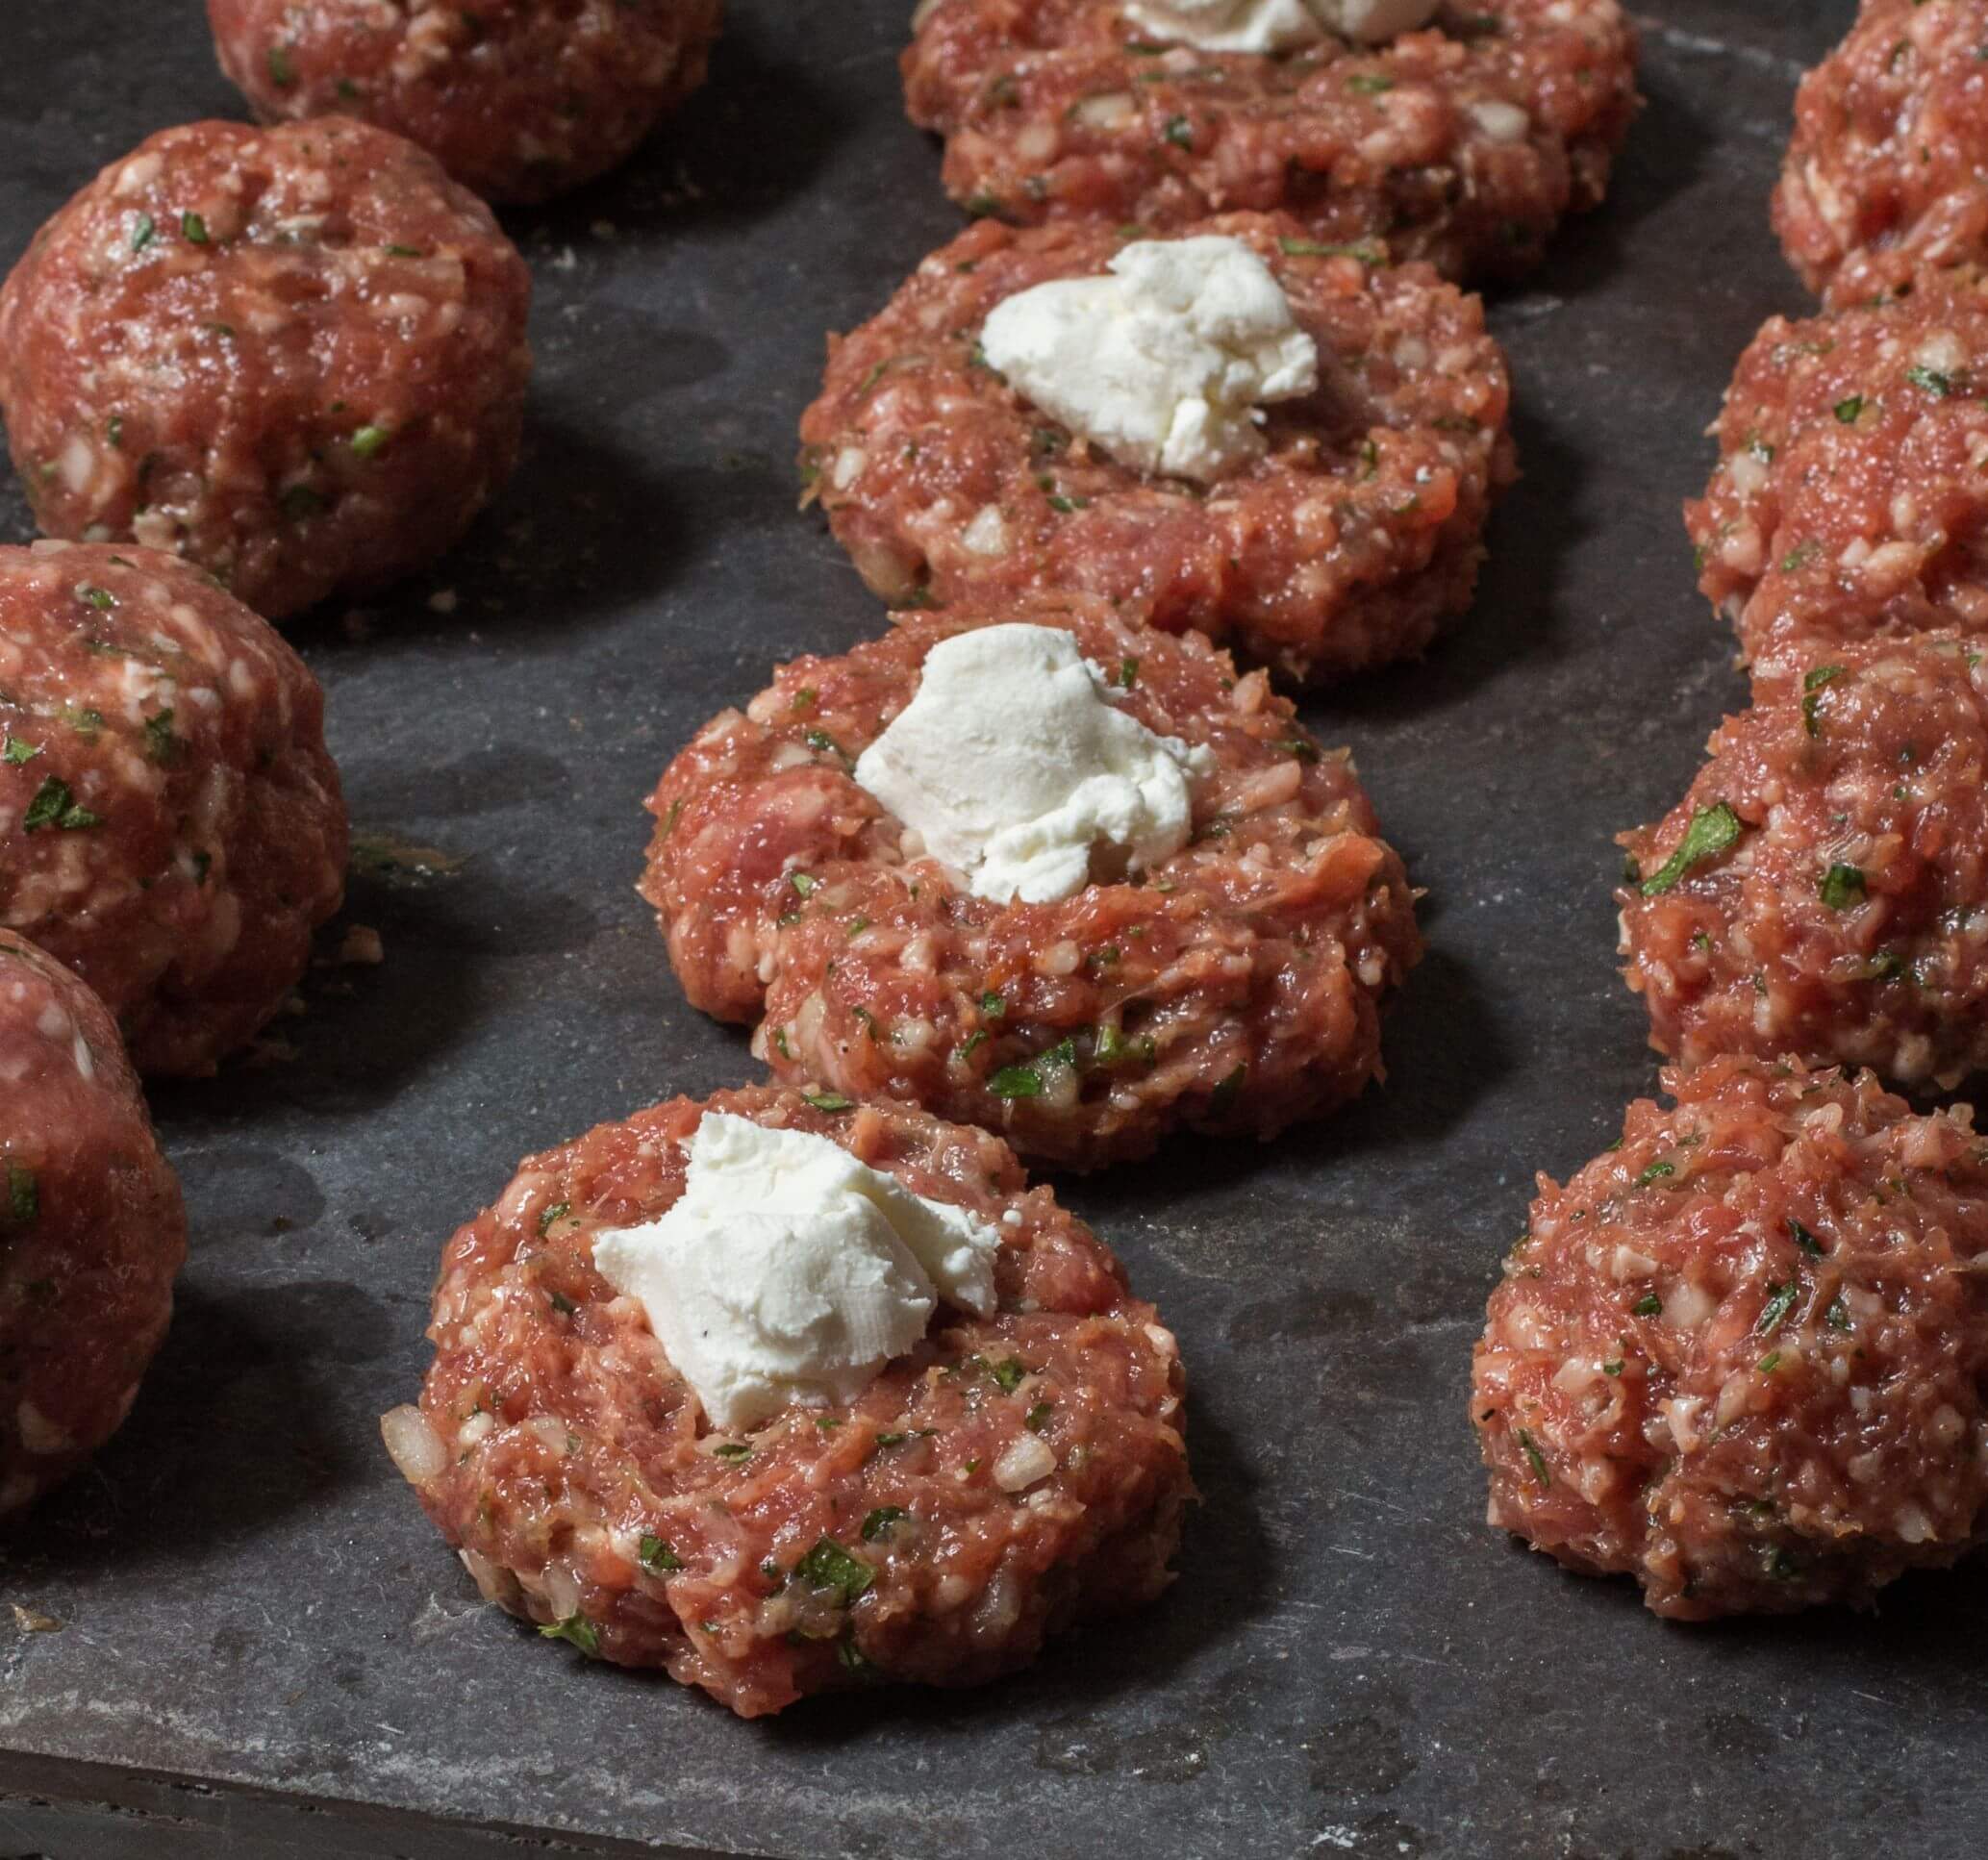 Forming ground lamb meatball mix around pieces of goat cheese on a board.